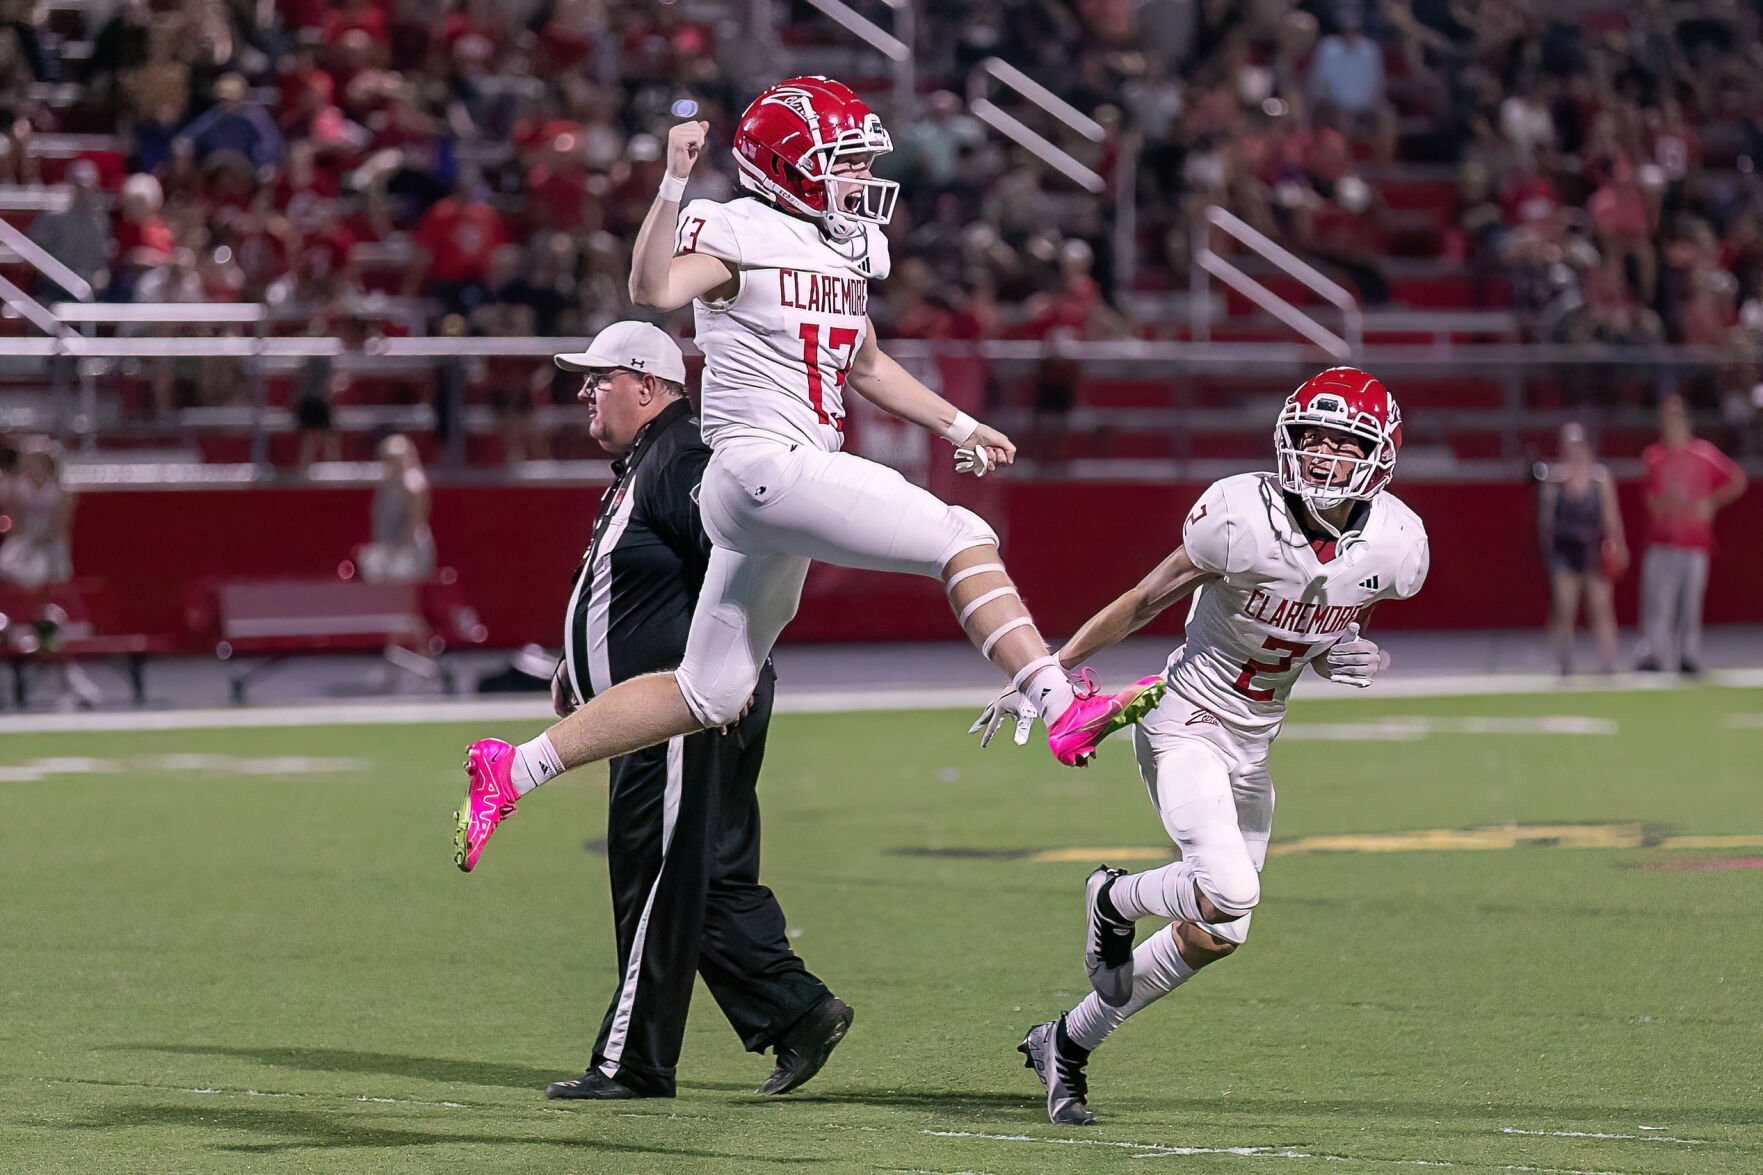 Claremore Dominant with 5-0 Record and Impressive Offense, Predicts Victory Against Pryor